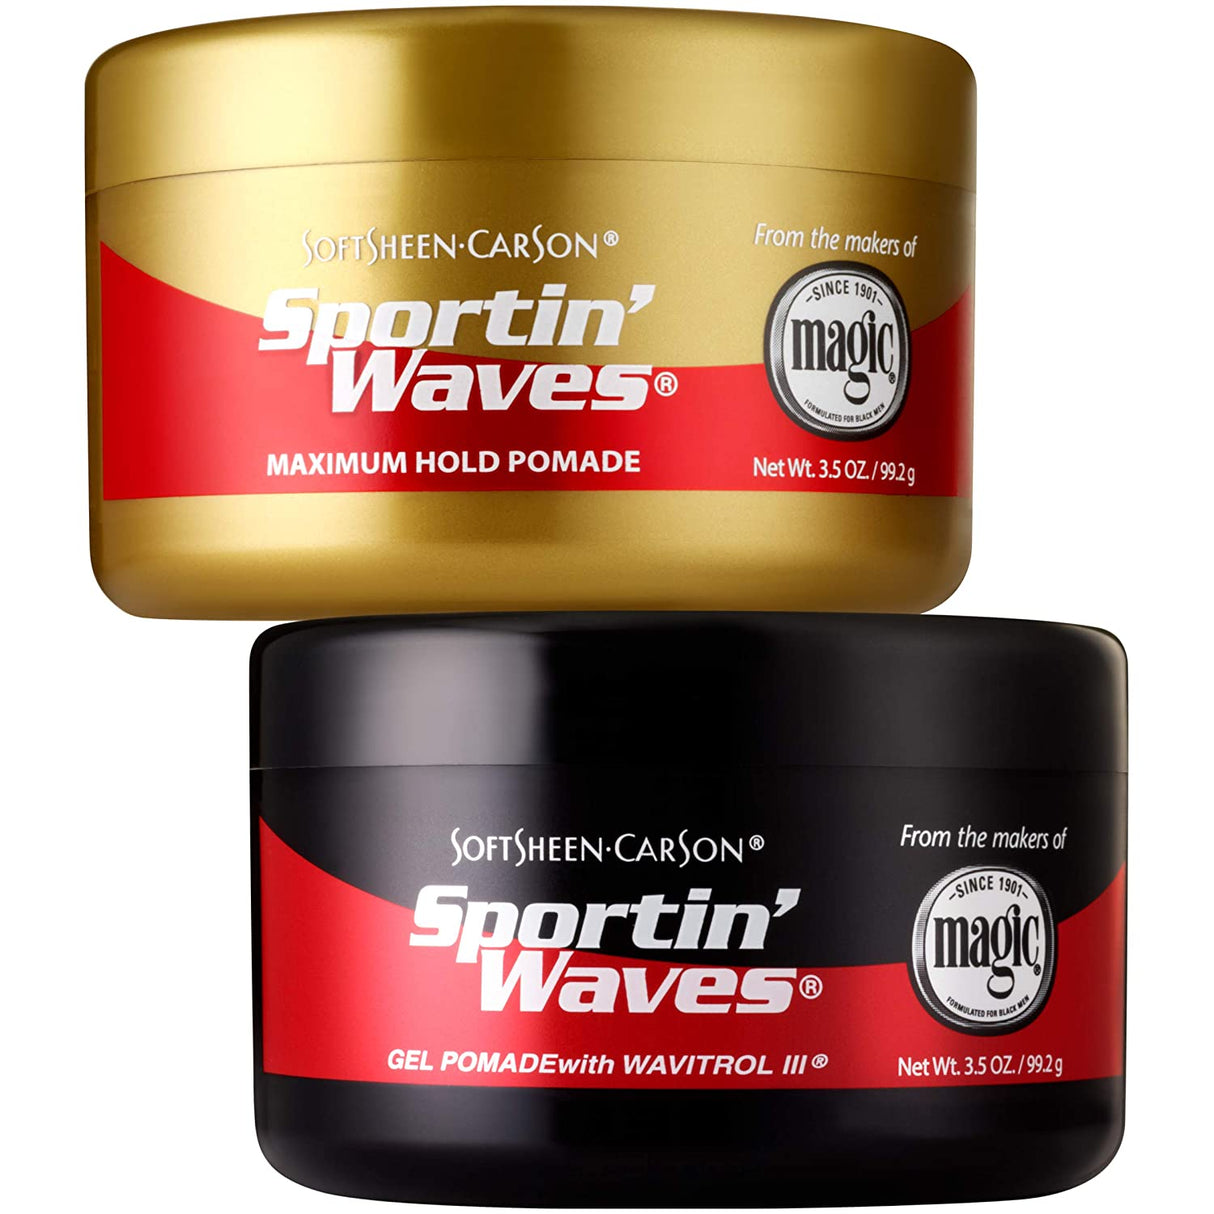 SoftSheen-Carson Sportin' Waves Gel Pomade with Wavitrol III, 3.5 oz Find Your New Look Today!